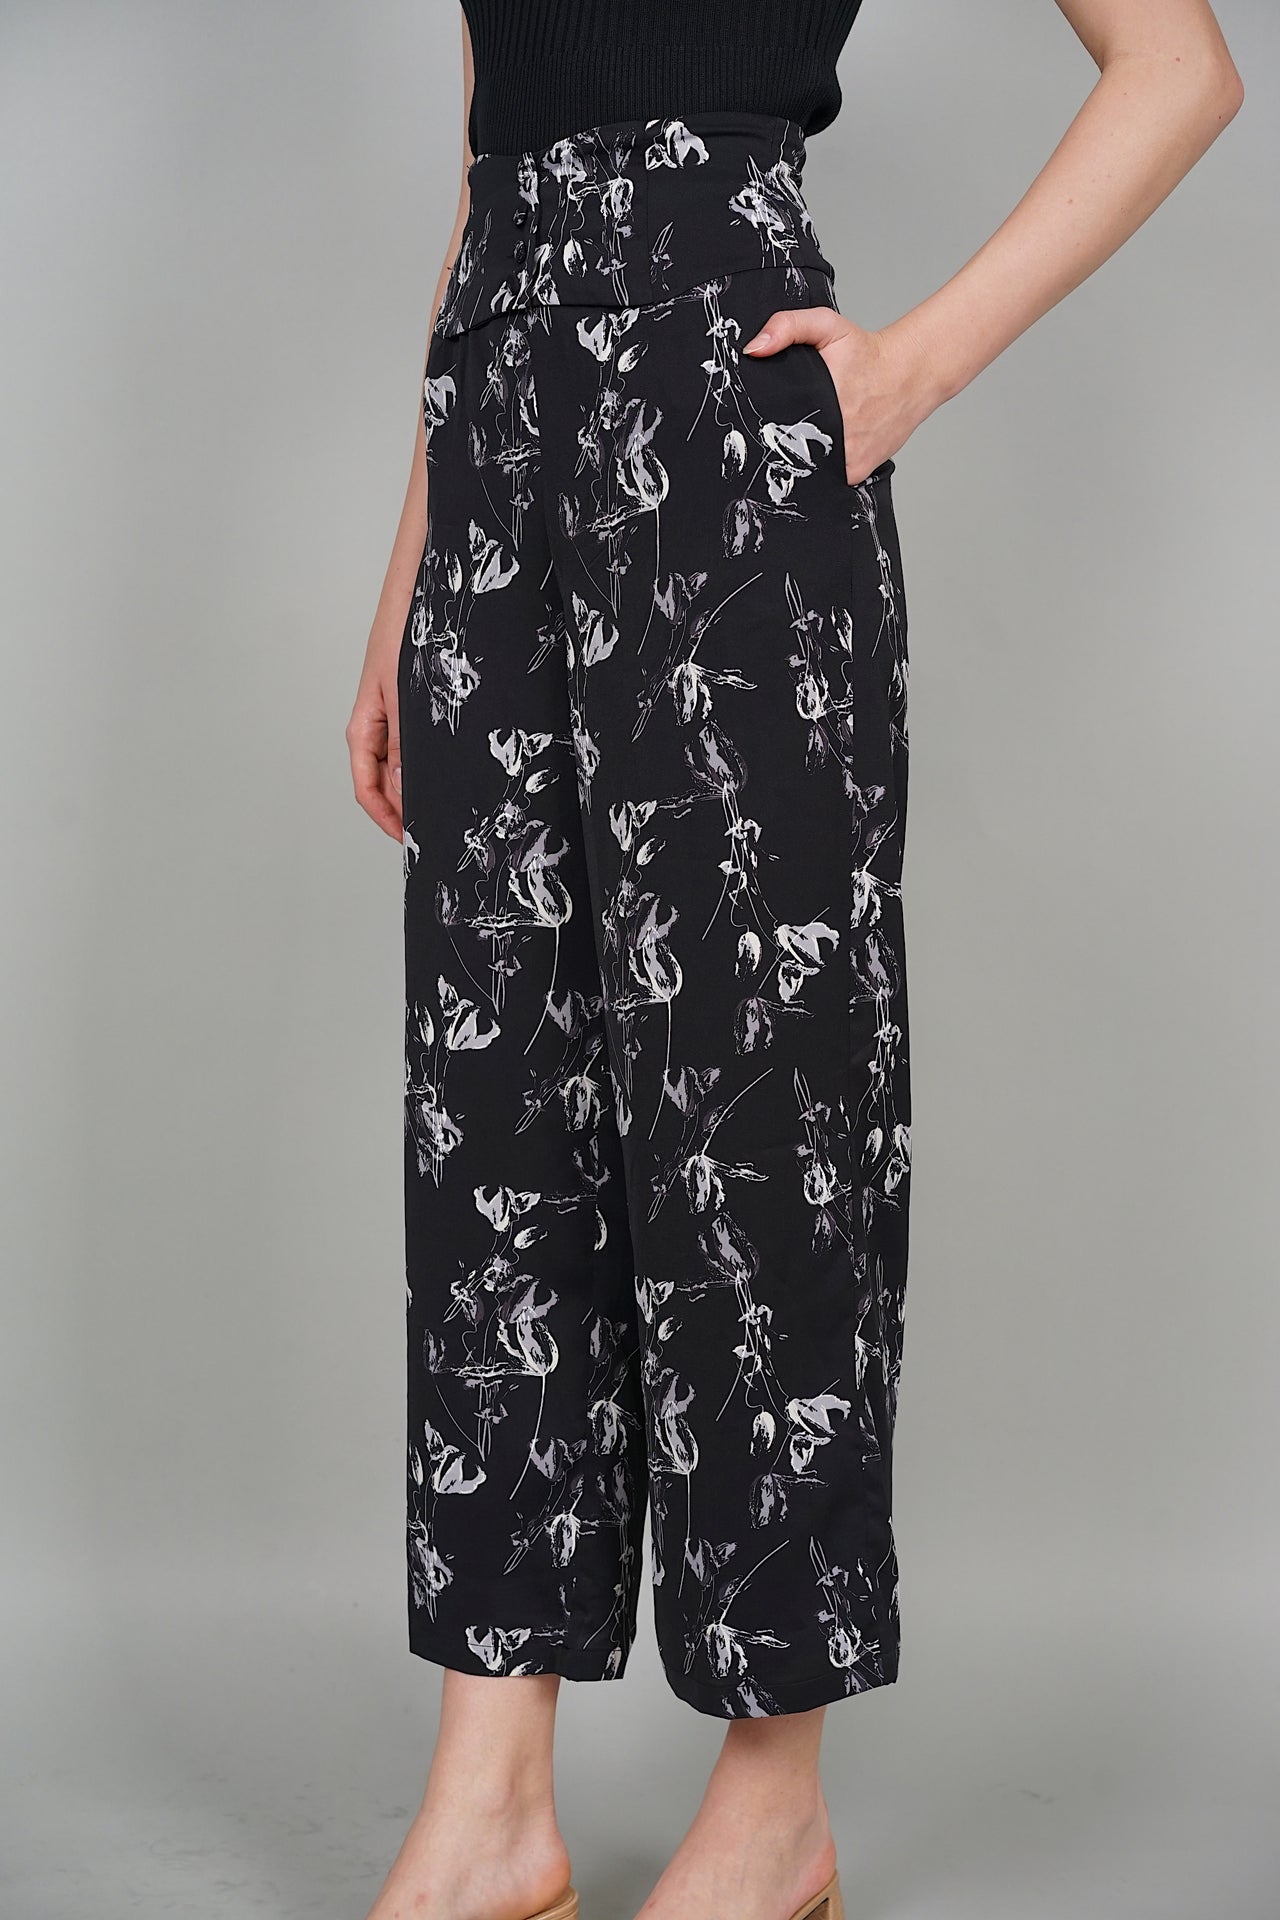 Yira High Waisted Pants in Black Floral